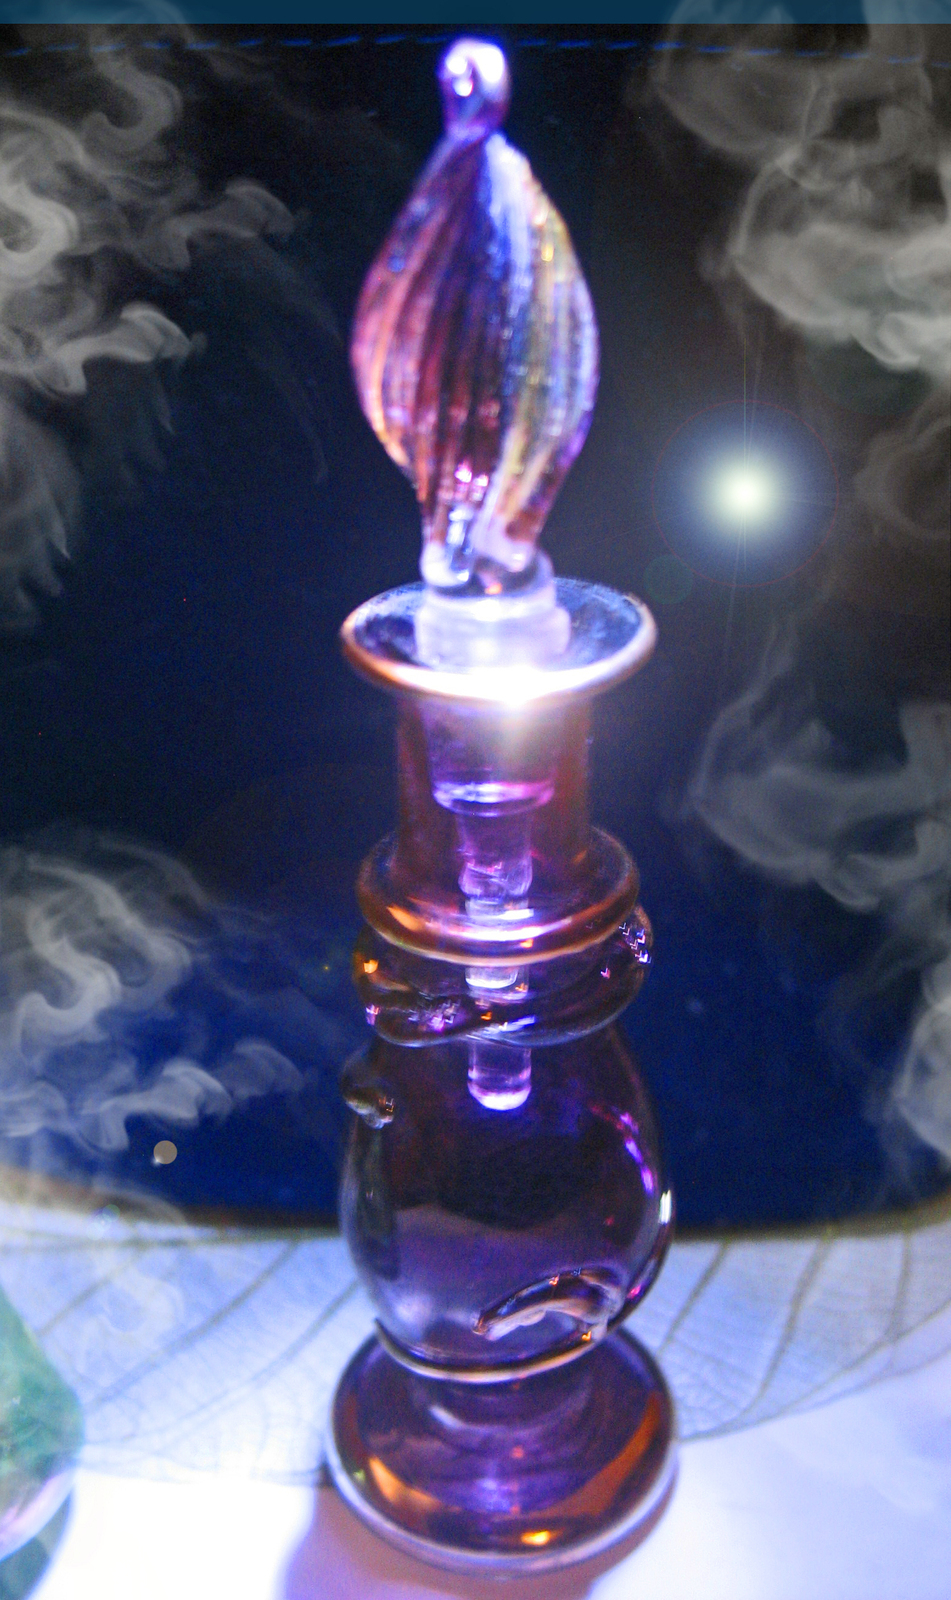 FREE W $90 Haunted AWAKEN EXOTIC NIGHTS OIL PERFUME COLOGNE 77X MAGICK WITCH